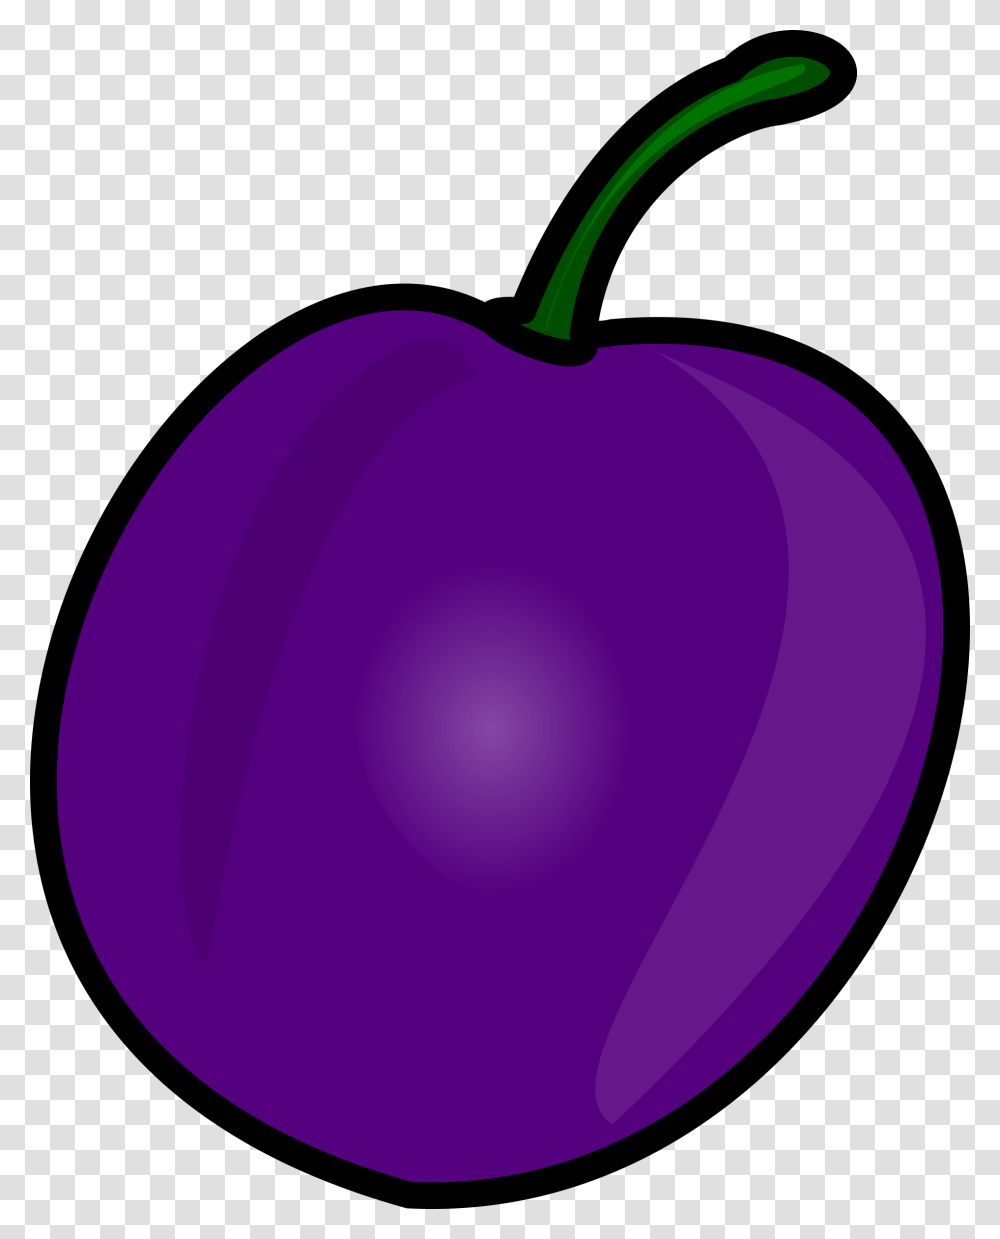 Plum Images Group With Items, Plant, Fruit, Food, Lamp Transparent Png